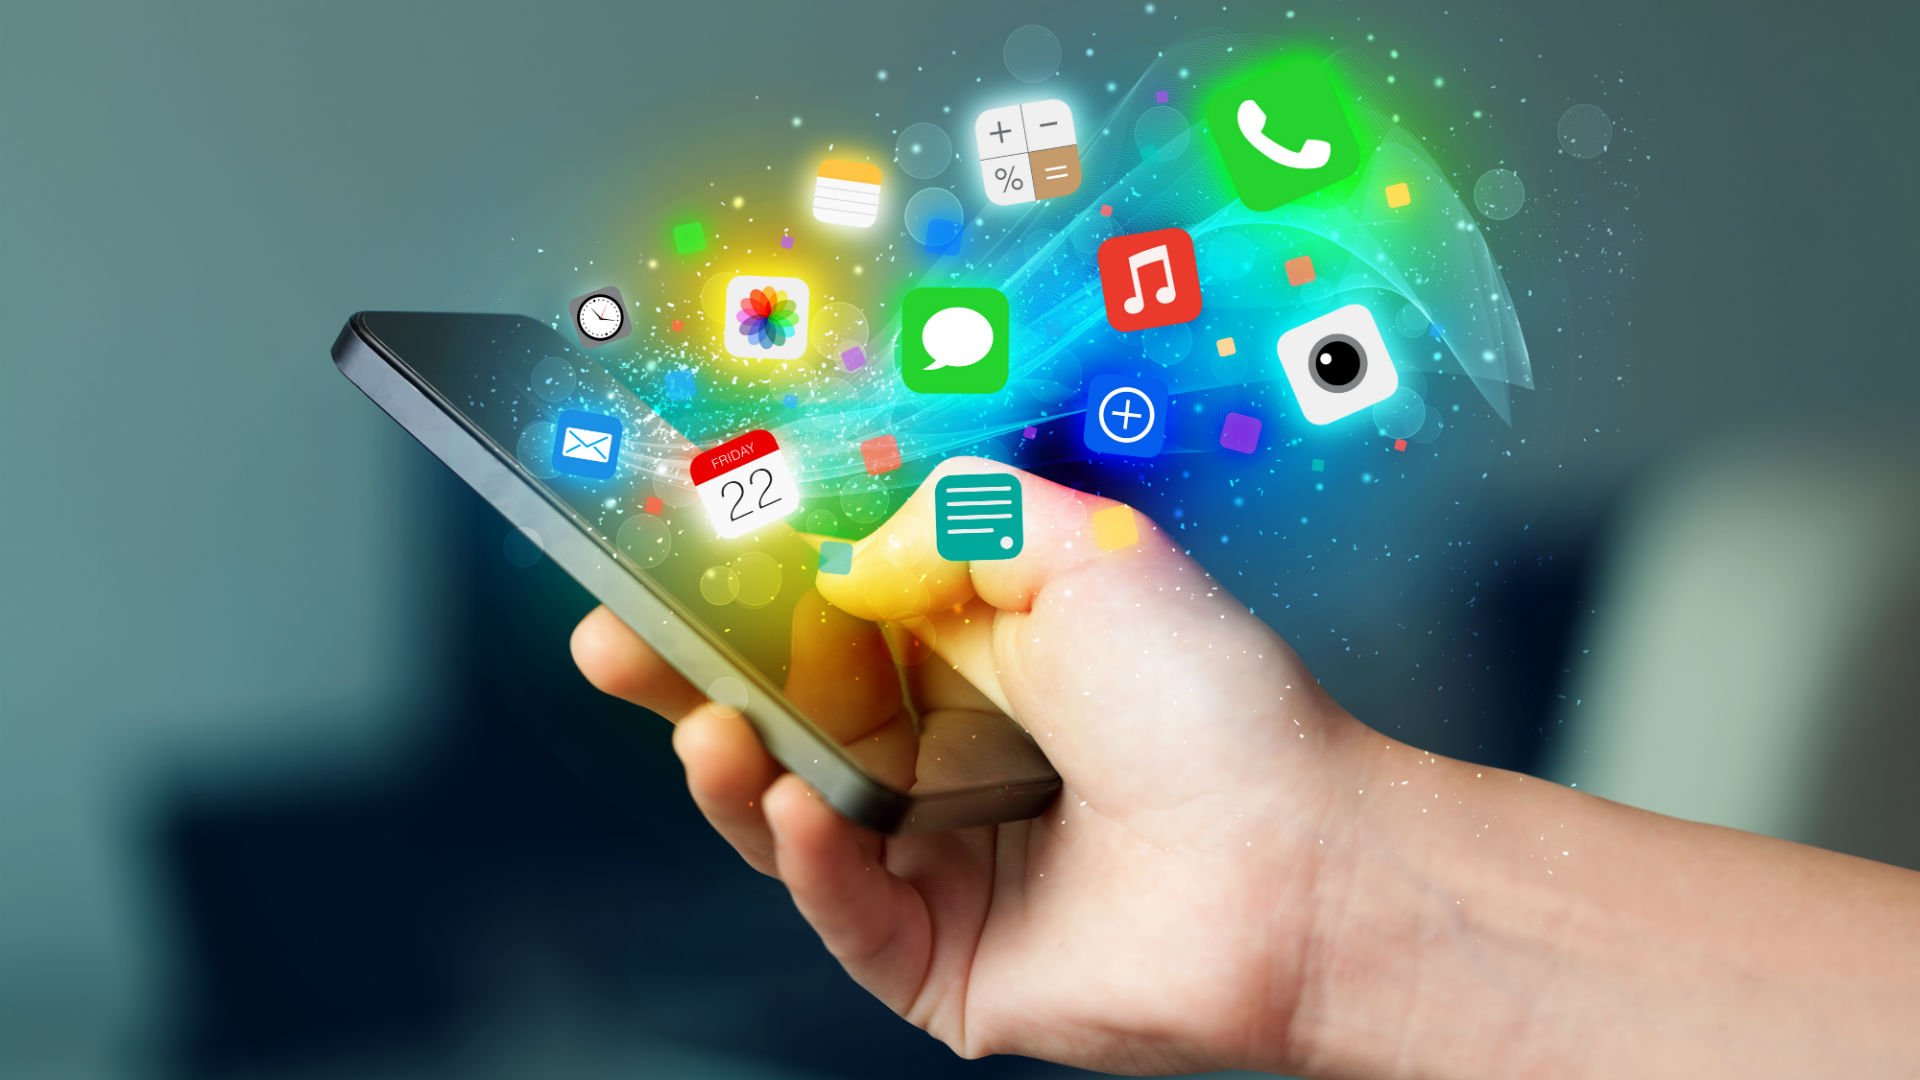 The next generation of apps – what can you expect?